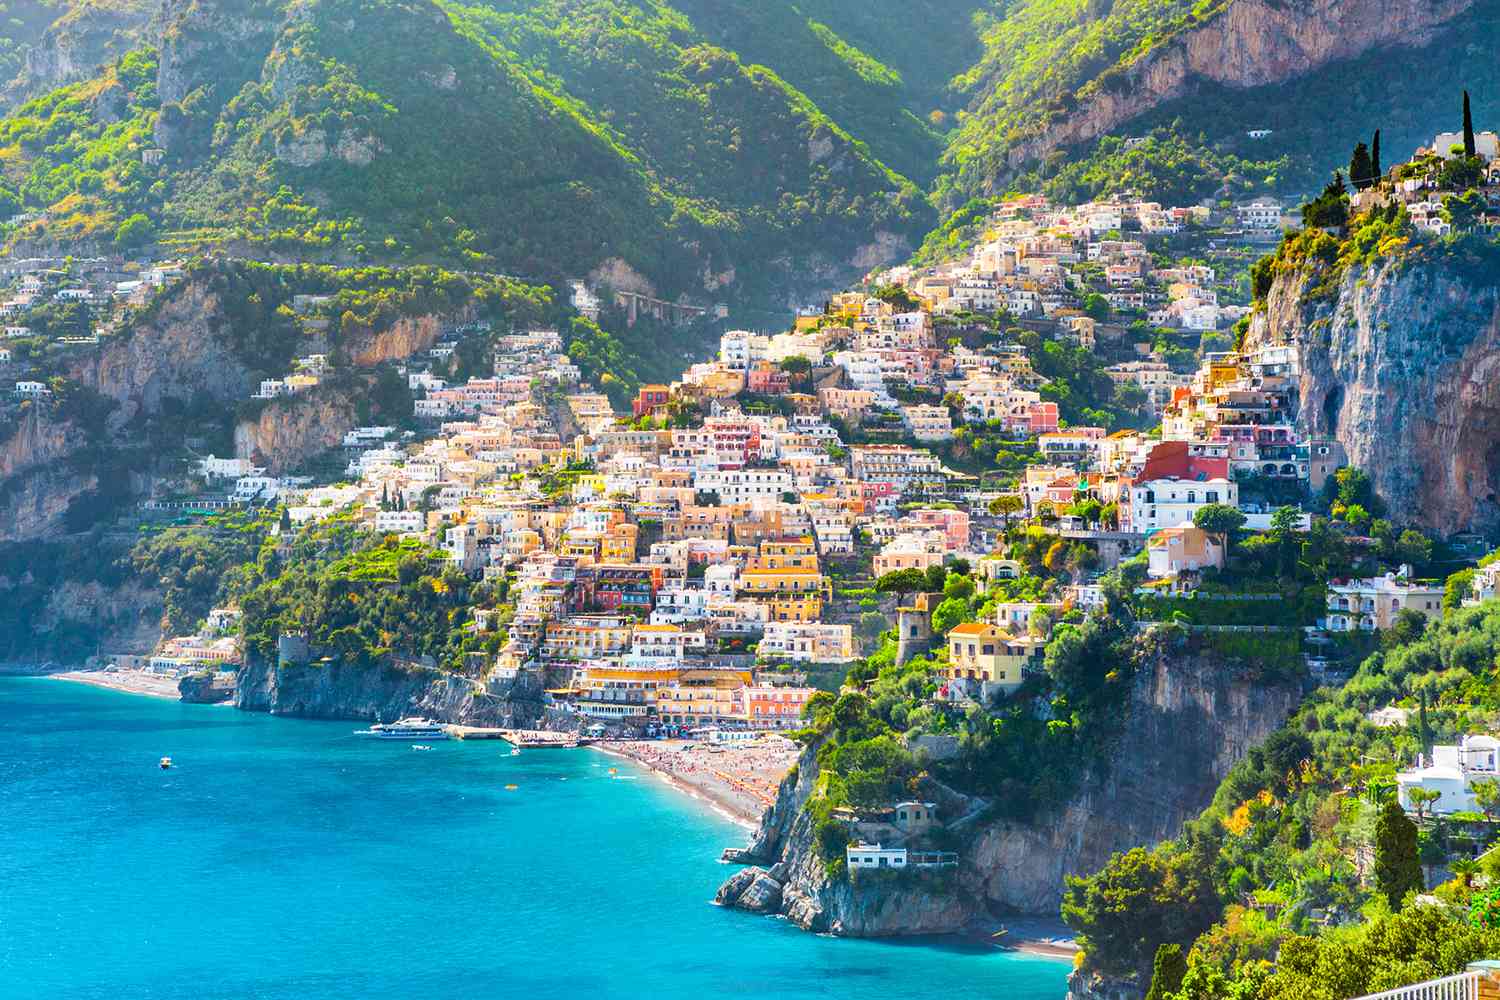 excursions from rome to amalfi coast